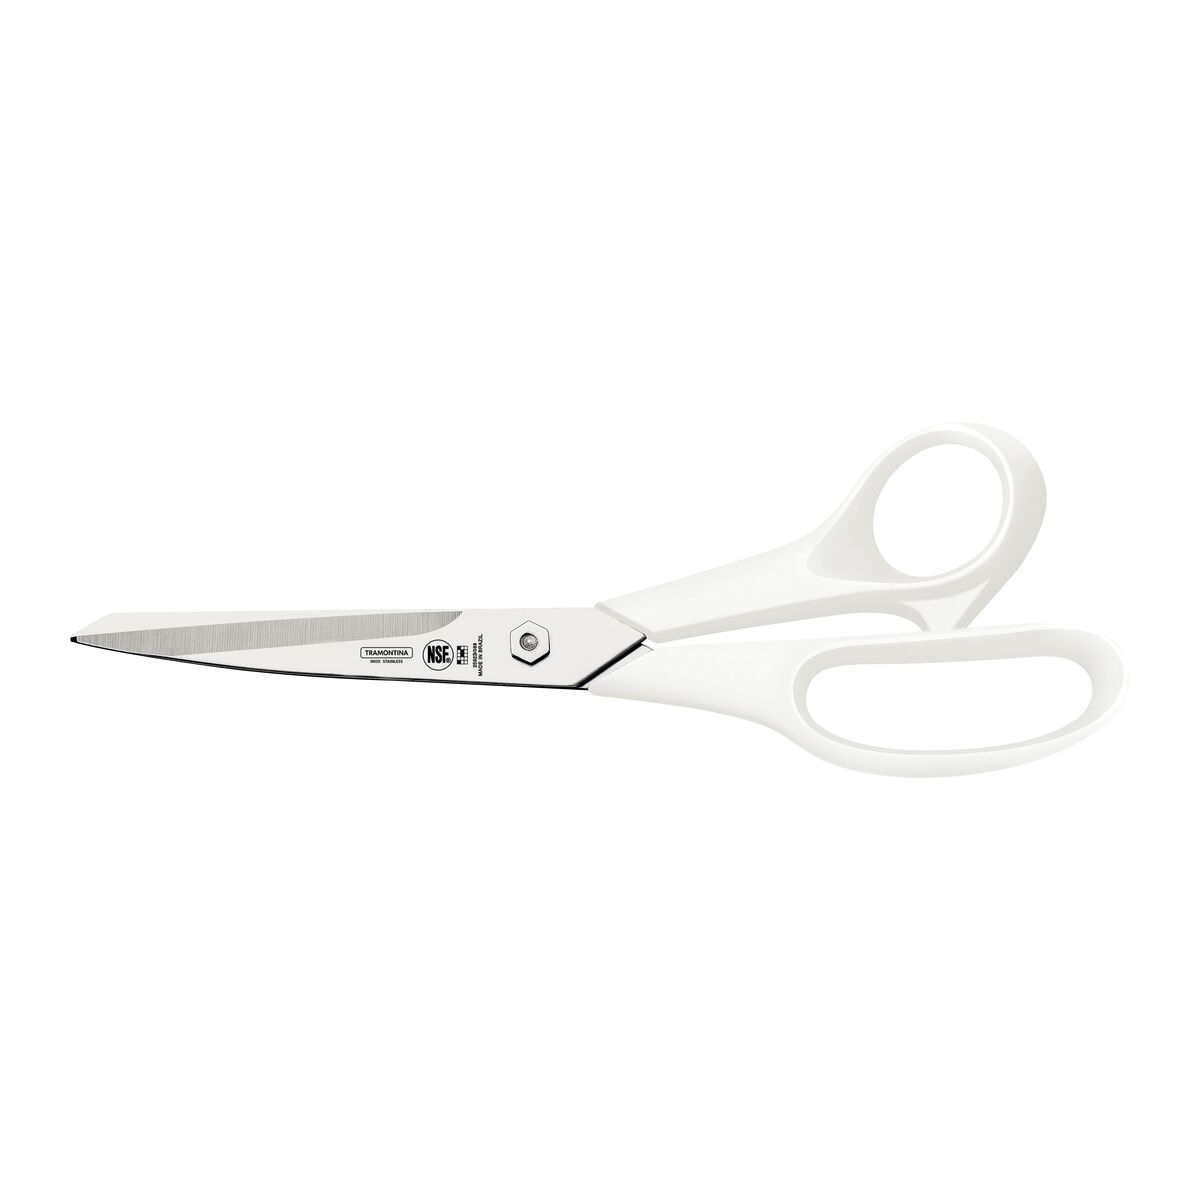 Tramontina Professional Collapsible Scissors with Stainless-Steel Plain Edge Blade and White Polypropylene Handle 8"